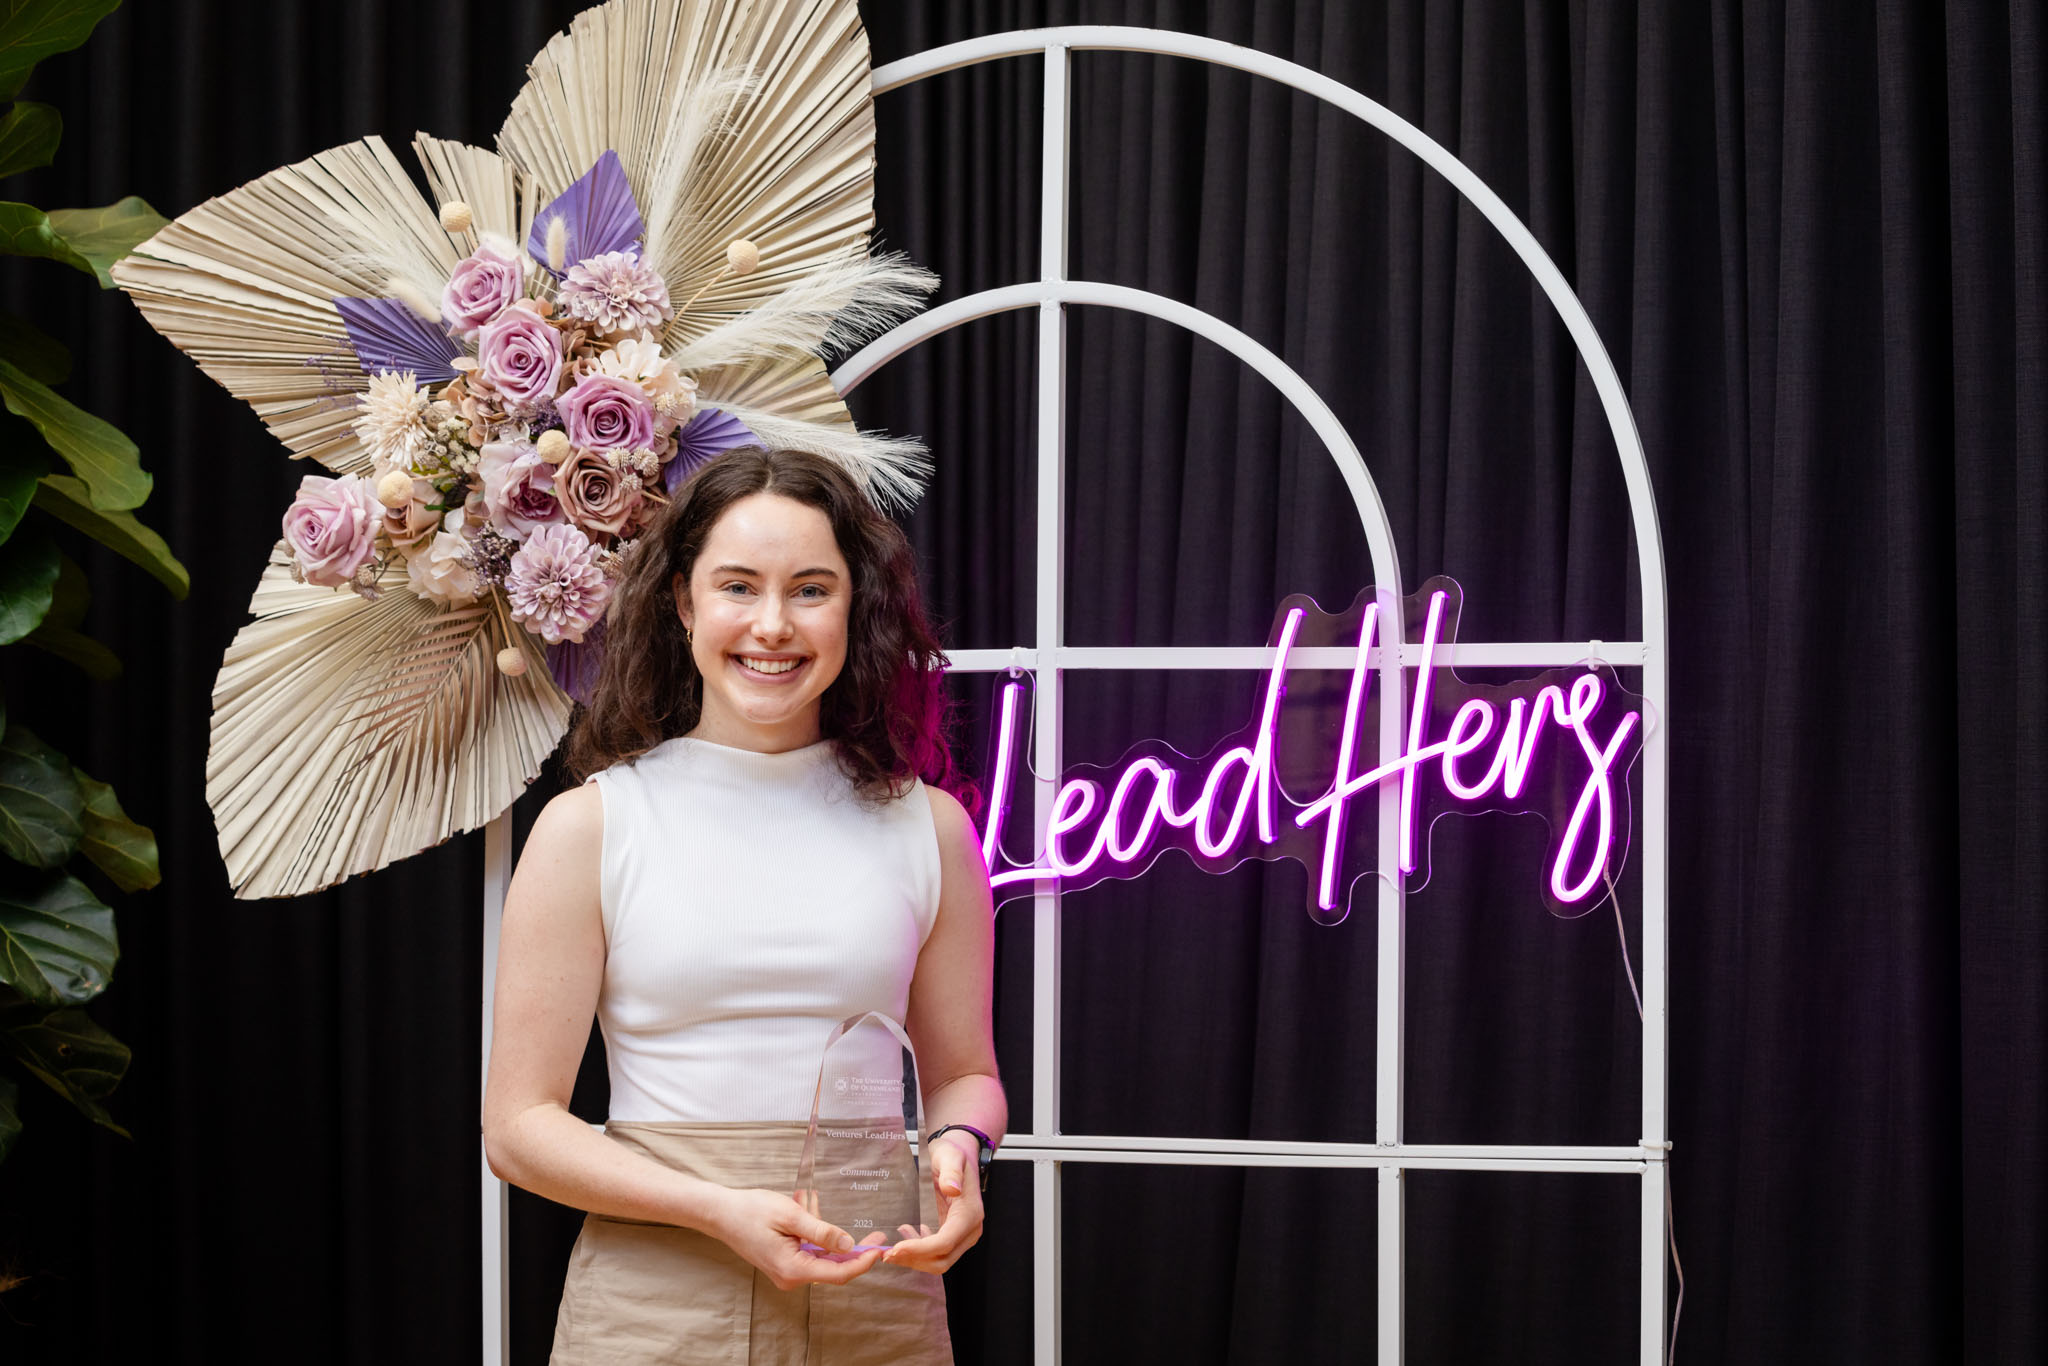 Clare Mahon standing in front of a LeadHers neon sign